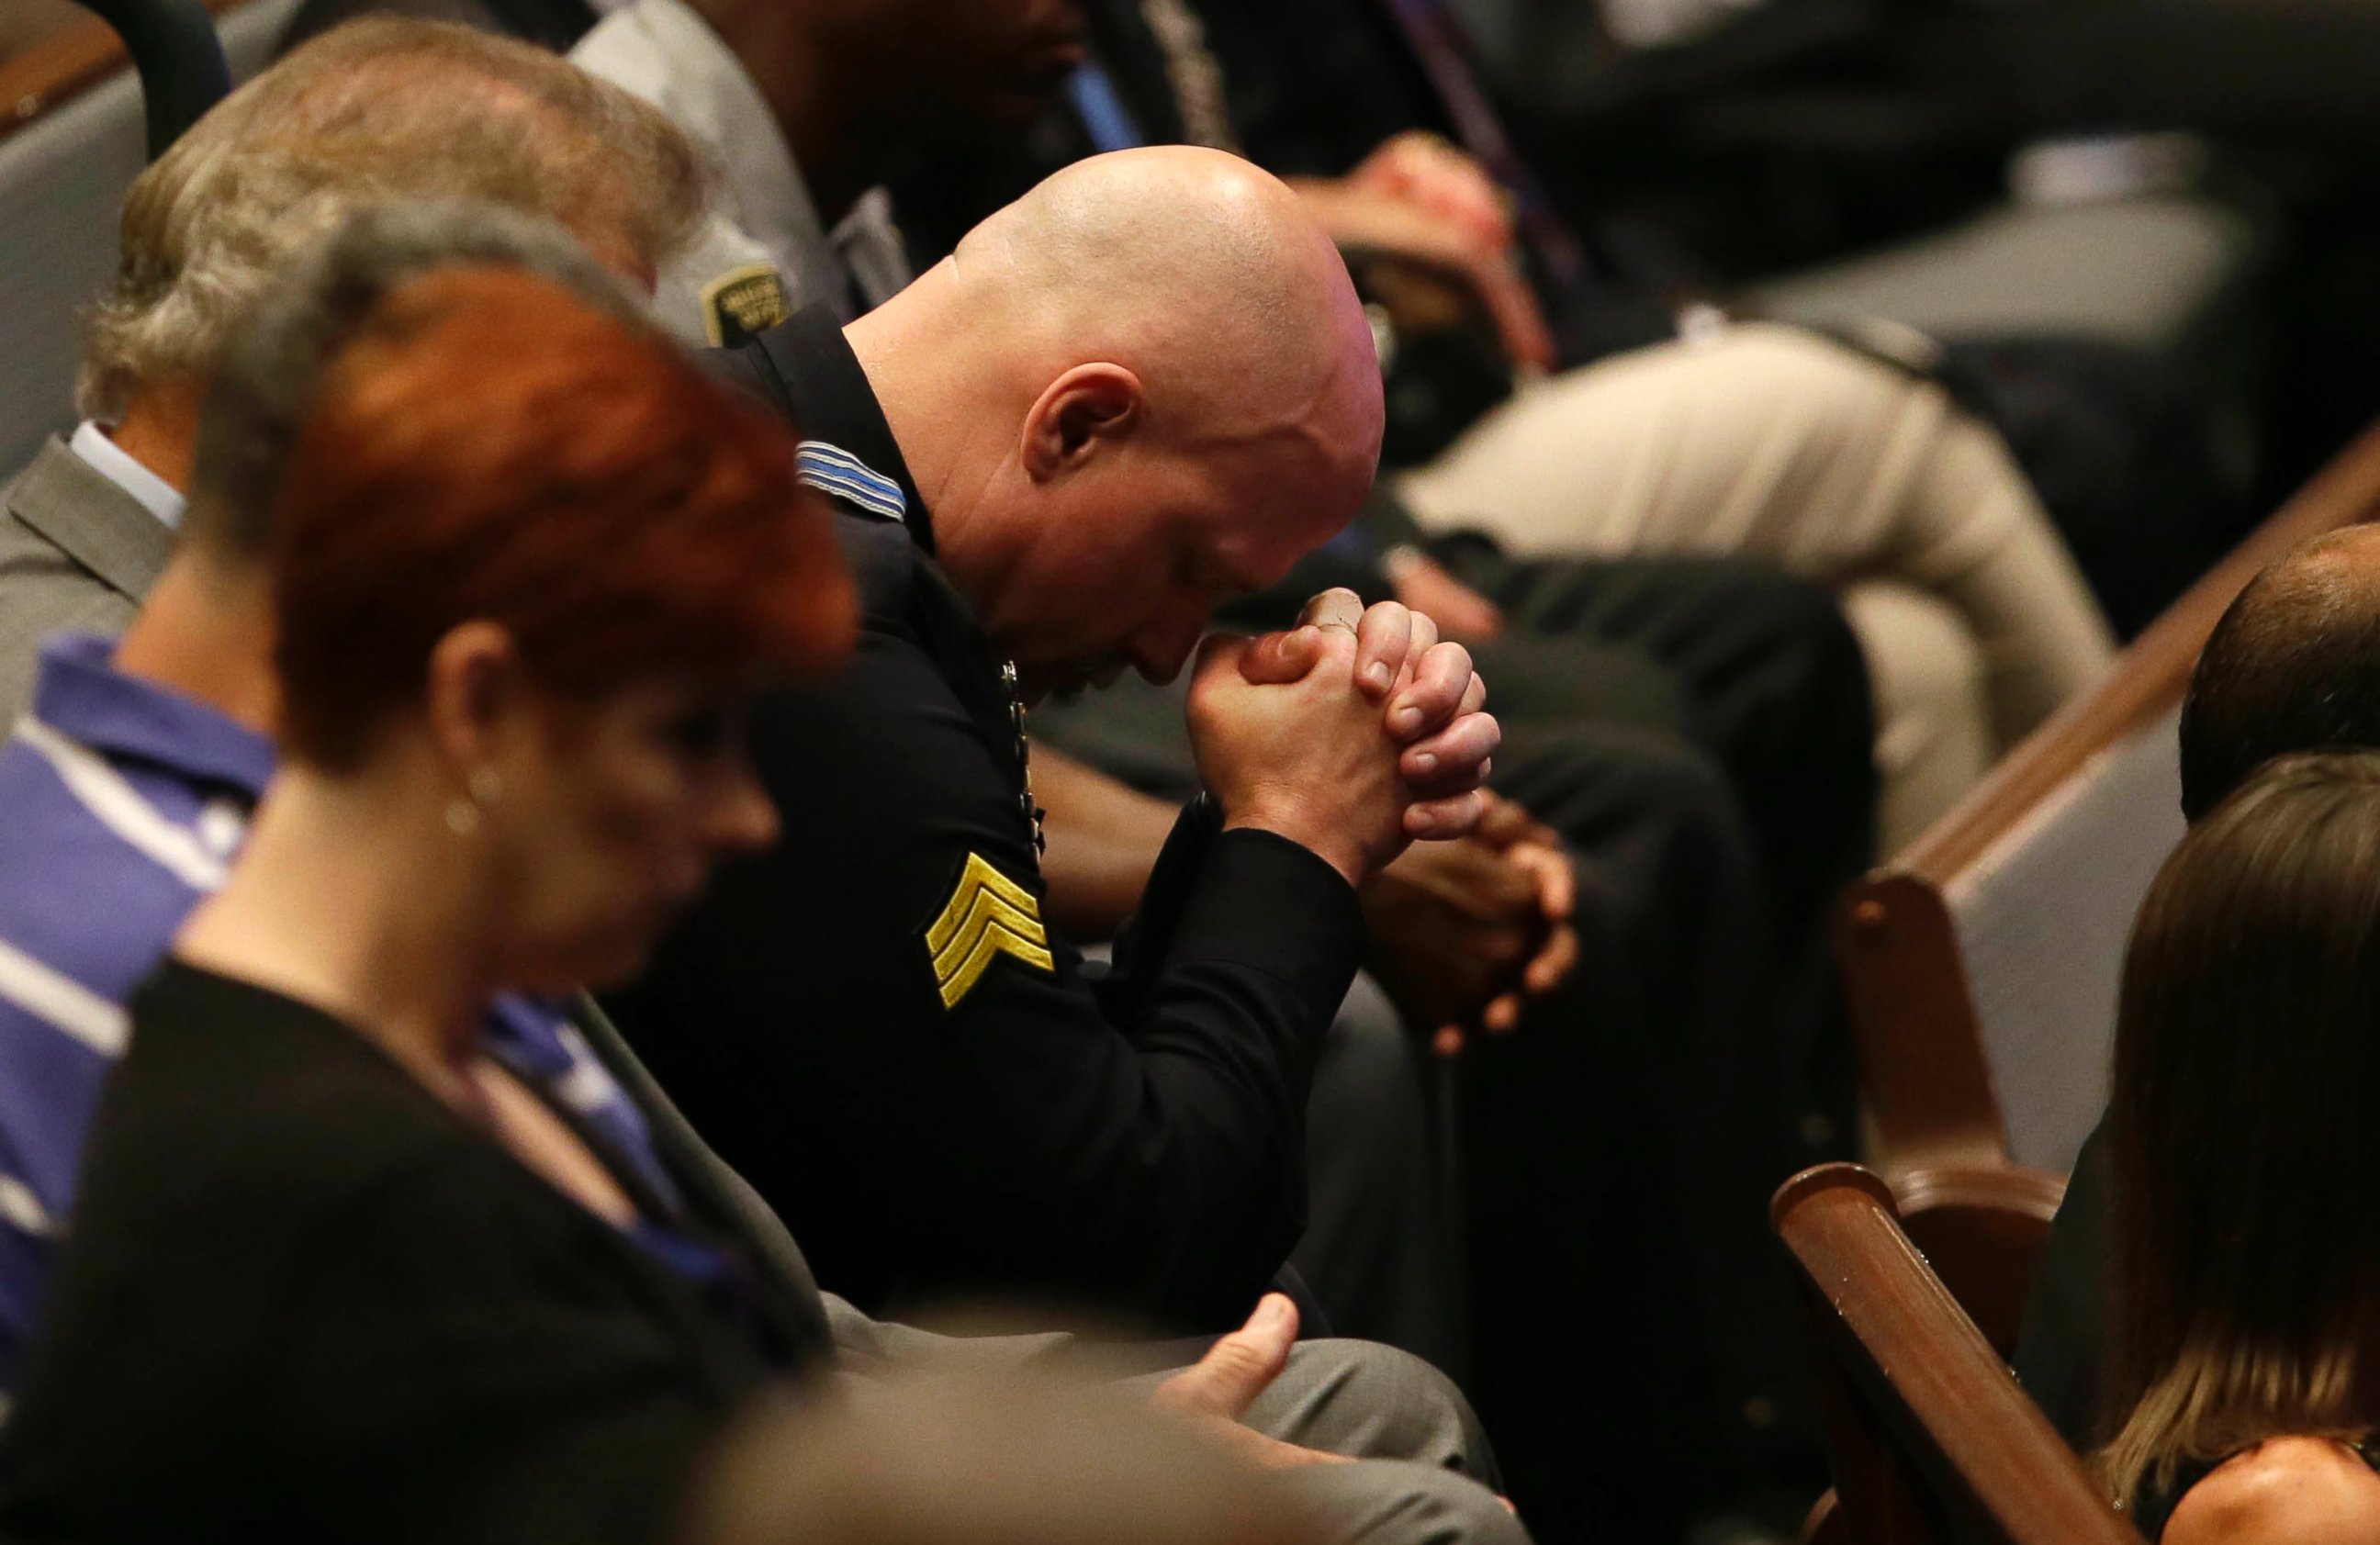 PHOTO: A police officer bows his head during the funeral for Dallas Police Sr. Cpl. Lorne Ahrens at Baptist Church in Plano, Texas, July 13, 2016.   